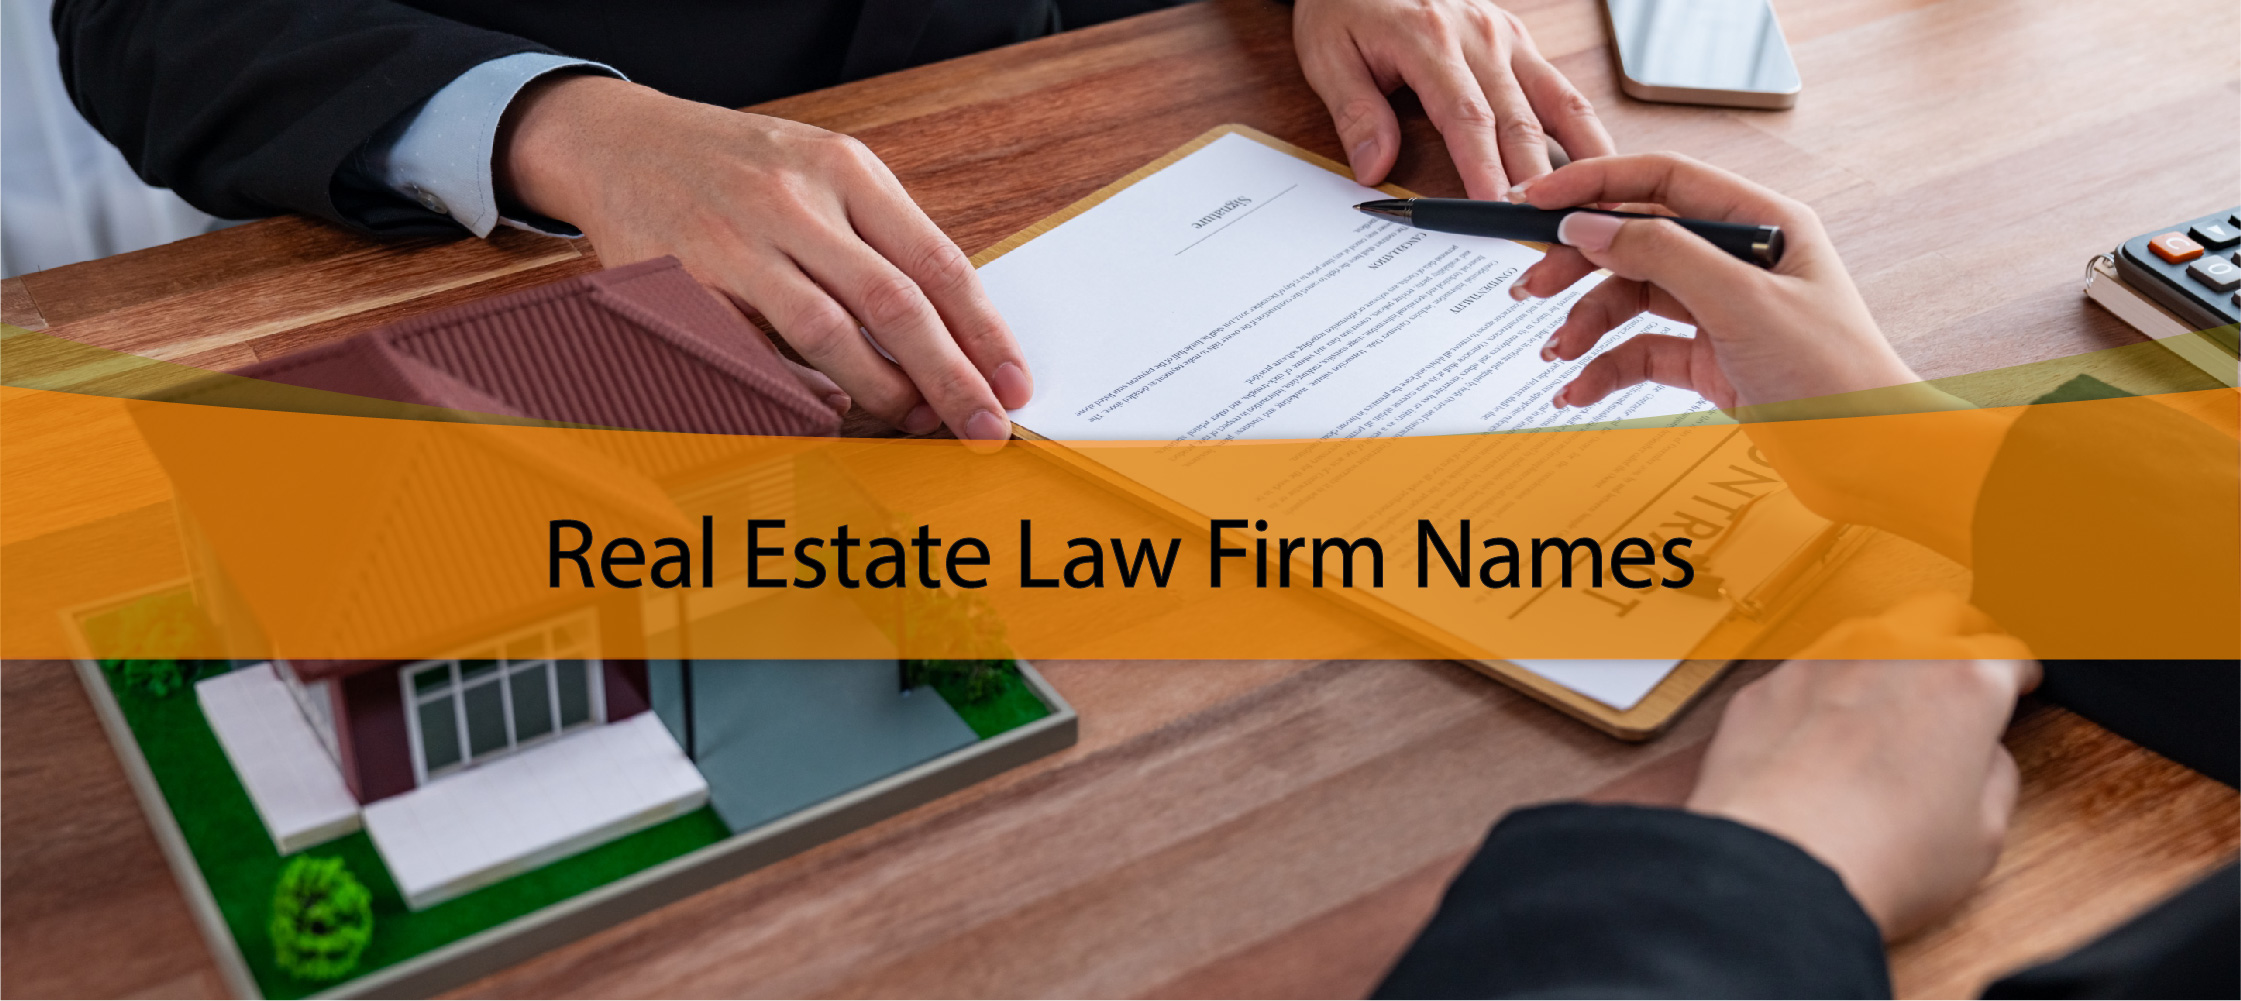 Real Estate Law Firm Names